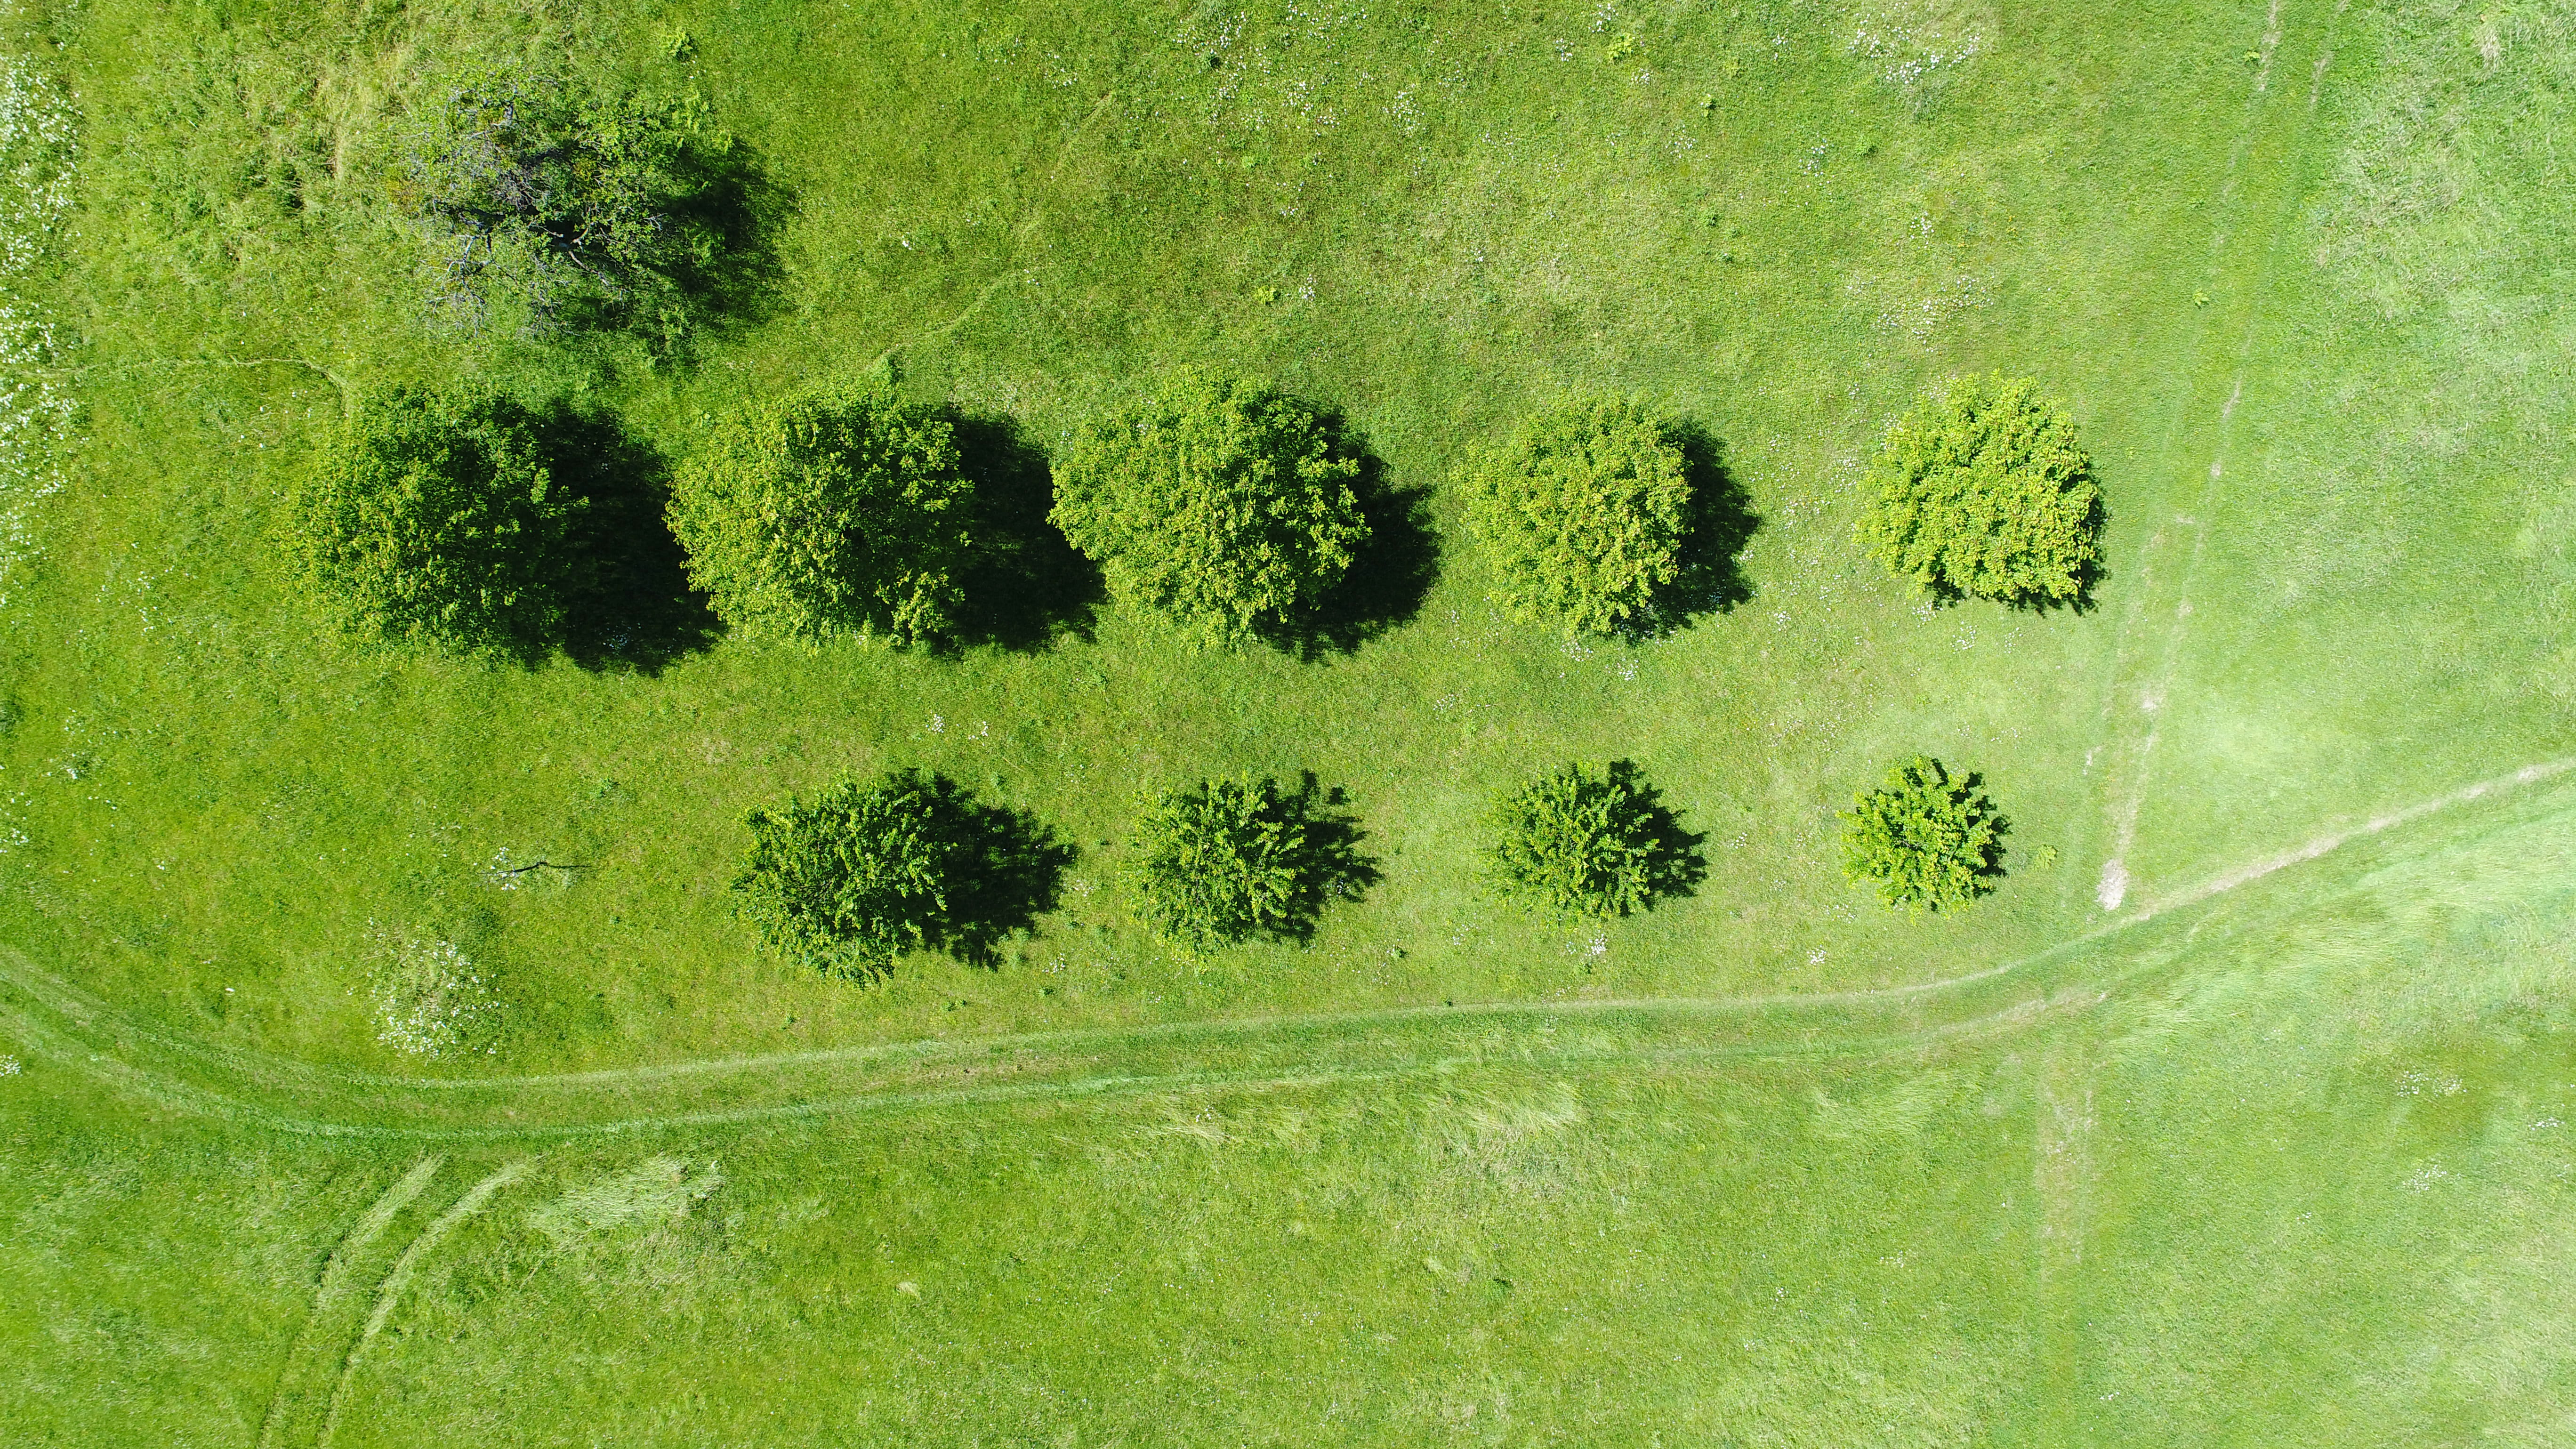 aerial photography of gree meadows, top view of green grassy field